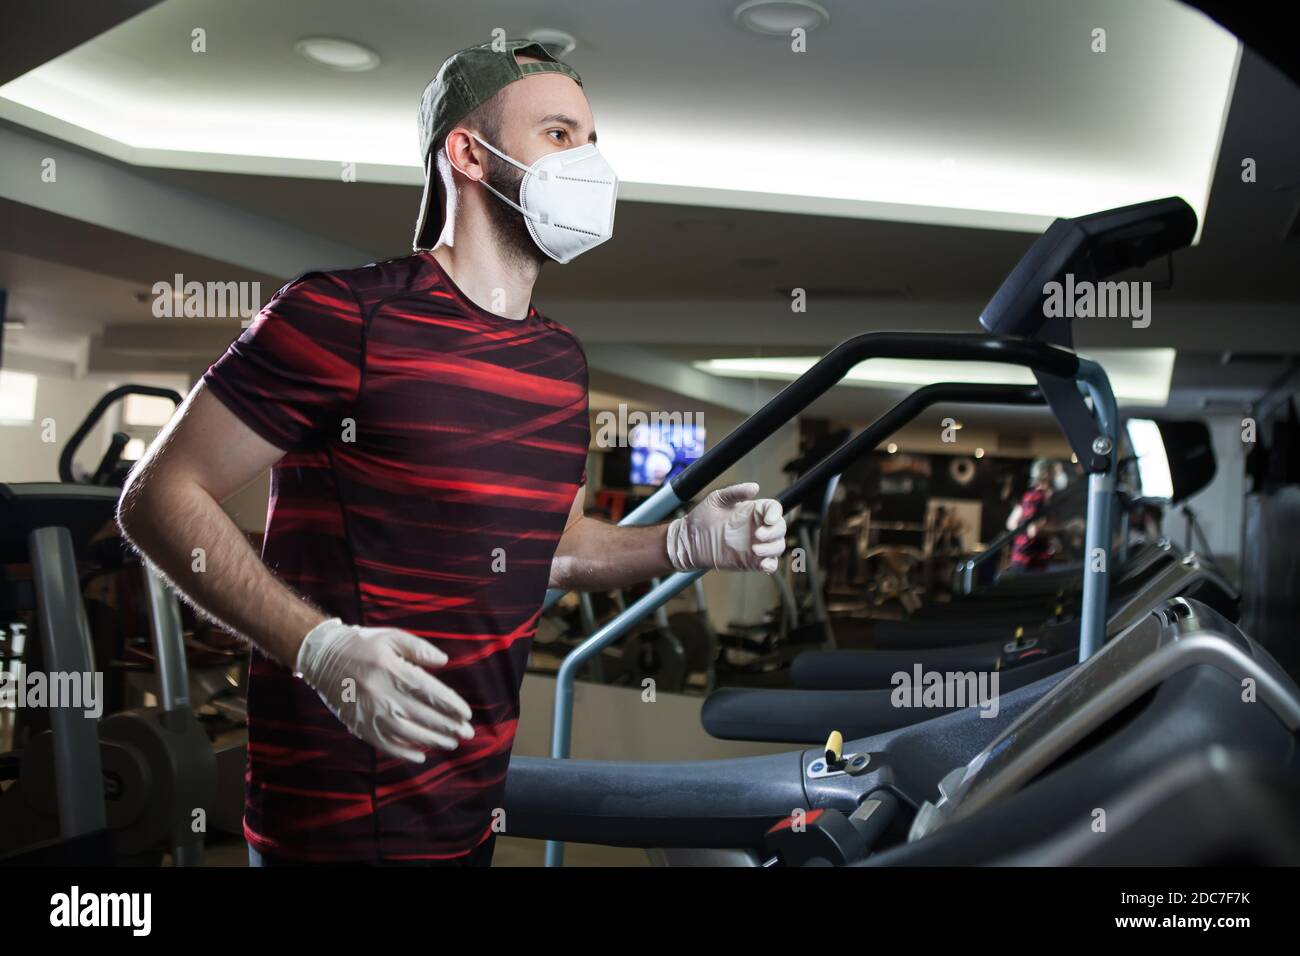 Young man running on treadmill in indoor gym,wearing protective face mask & rubber latex gloves,COVID-19 pandemic prevention of spread & transfer Stock Photo